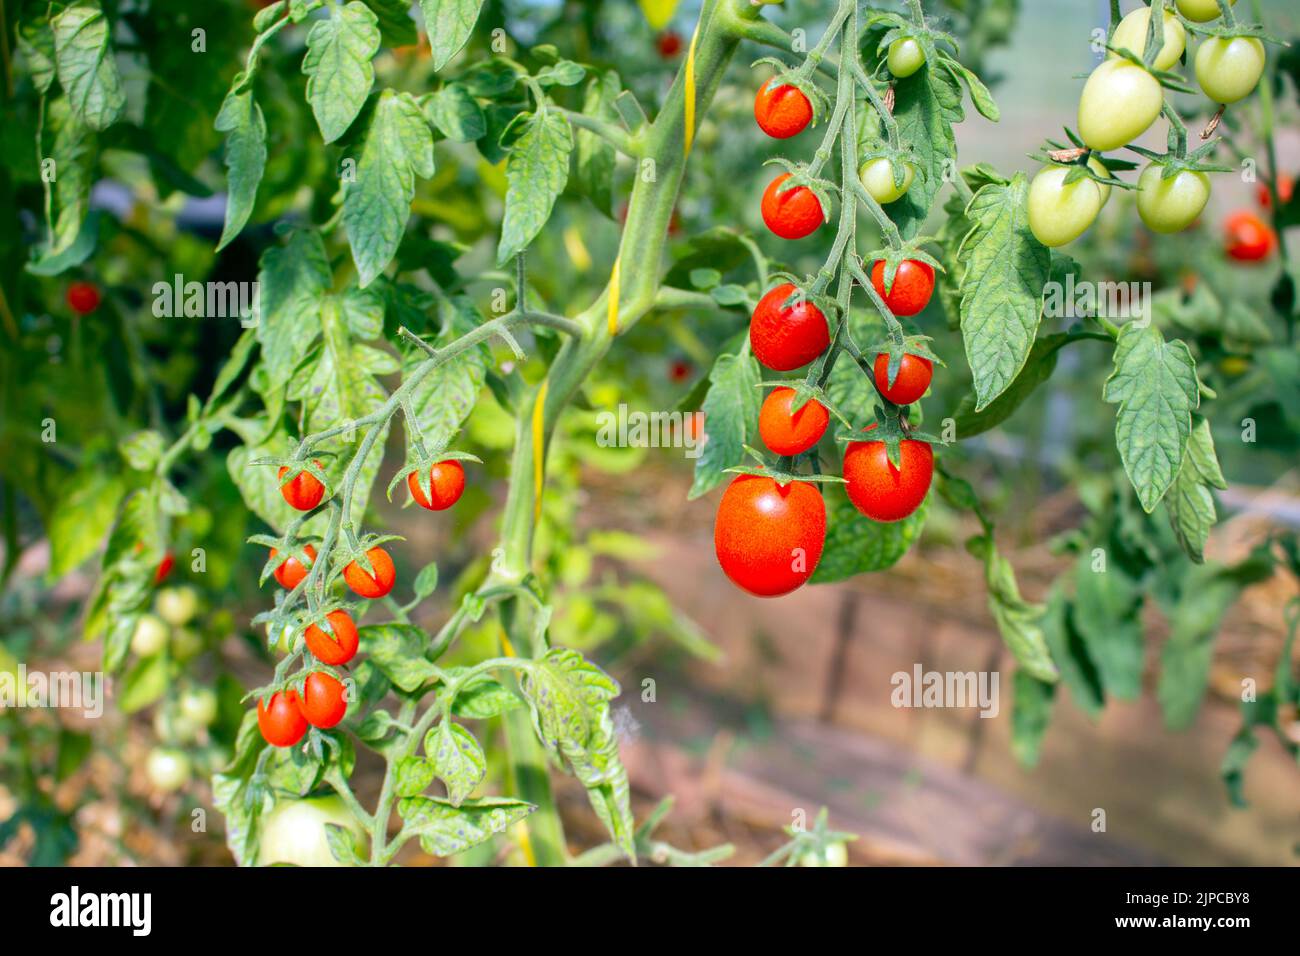 Group of red cherry tomatoes on a green plant in a greenhouse. Stock Photo